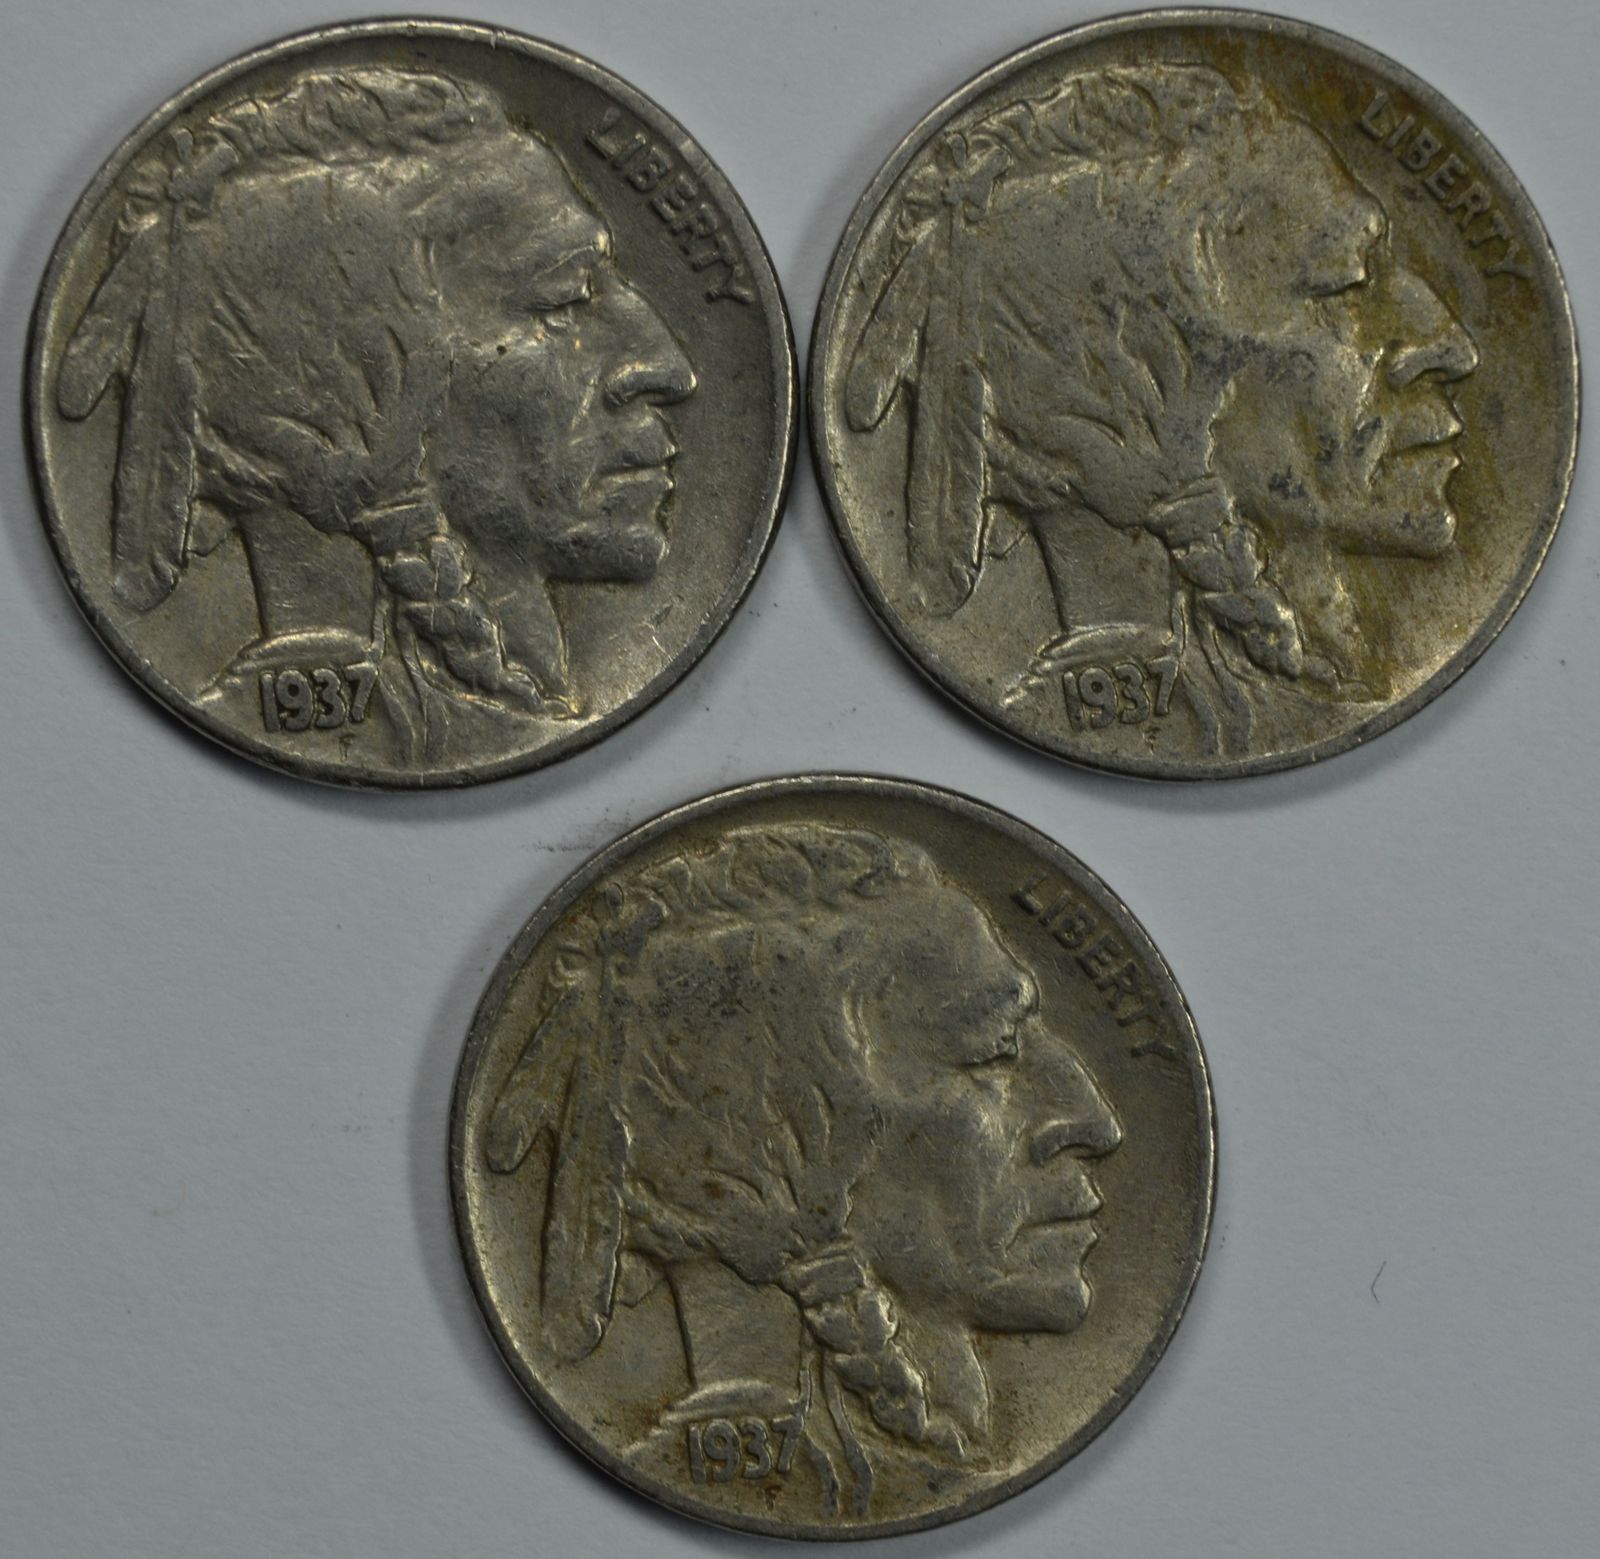 1937 P D S Buffalo circulated nickels  Total of 3 coins - $30.00